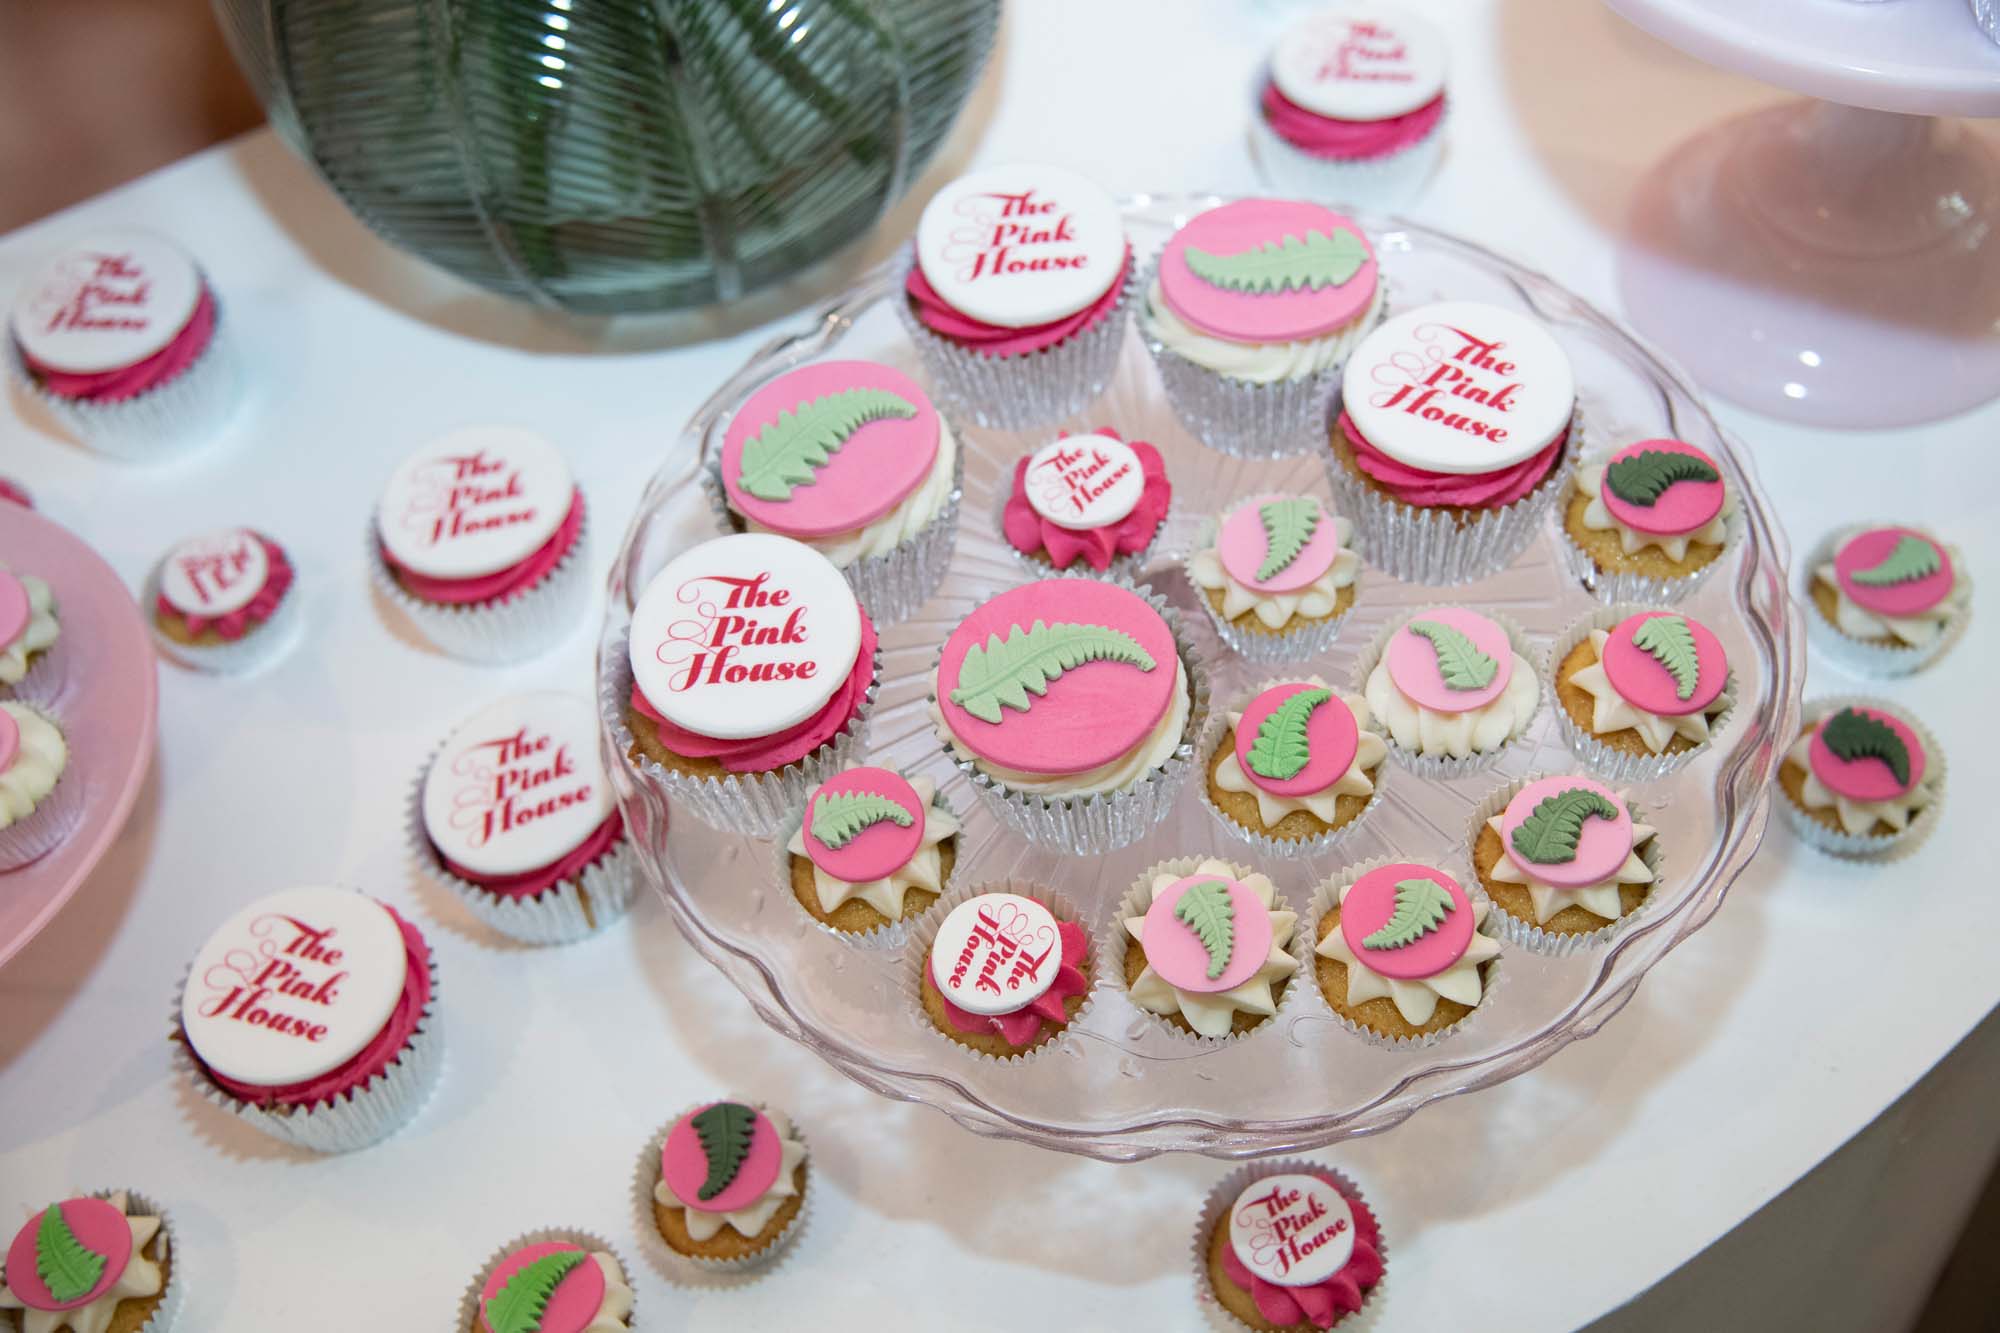 Cracking Cakes pink logo cupcakes for The Pink House